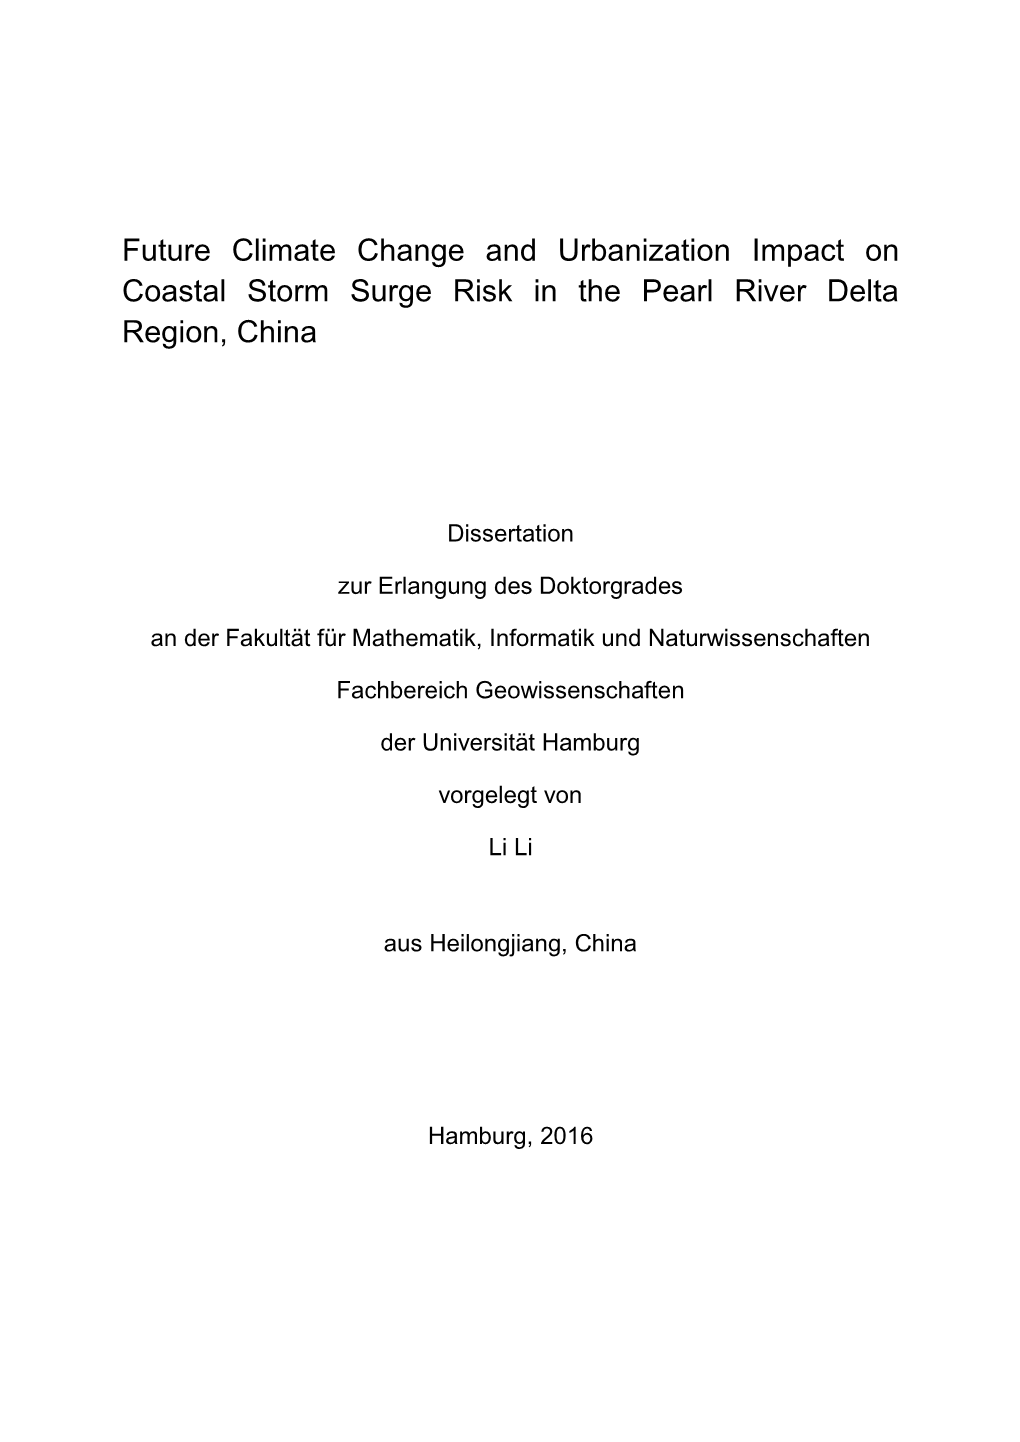 Future Climate Change and Urbanization Impact on Coastal Storm Surge Risk in the Pearl River Delta Region, China